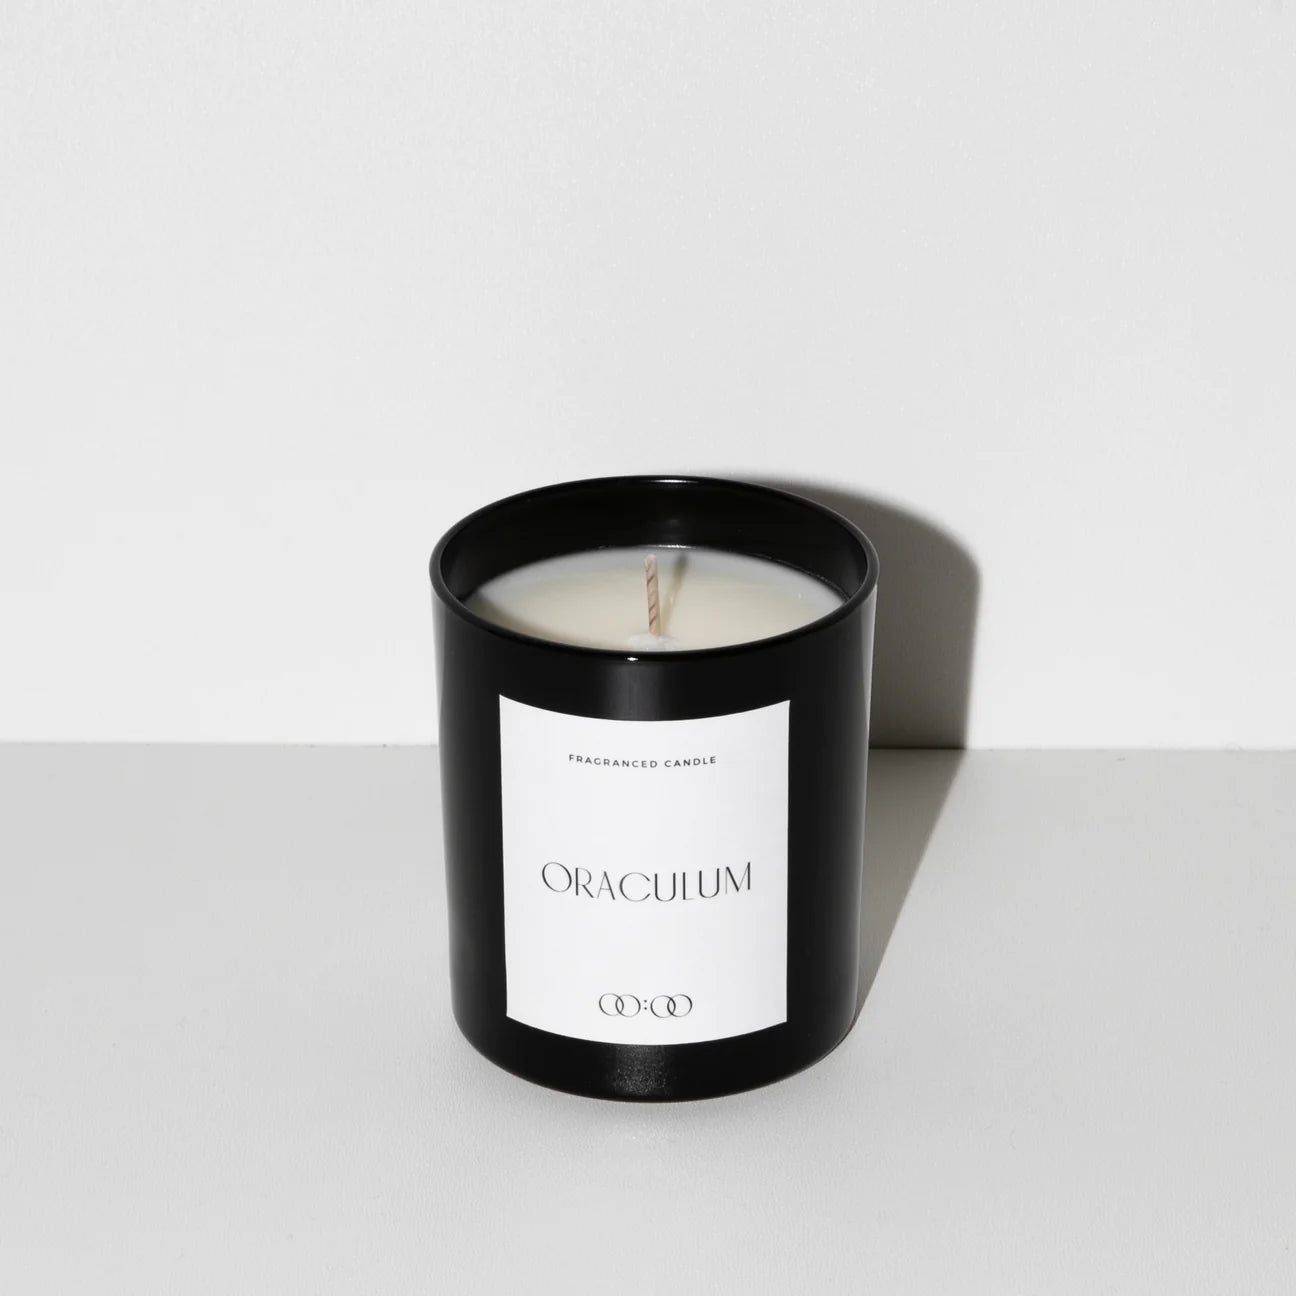 00:00 Scented Candle